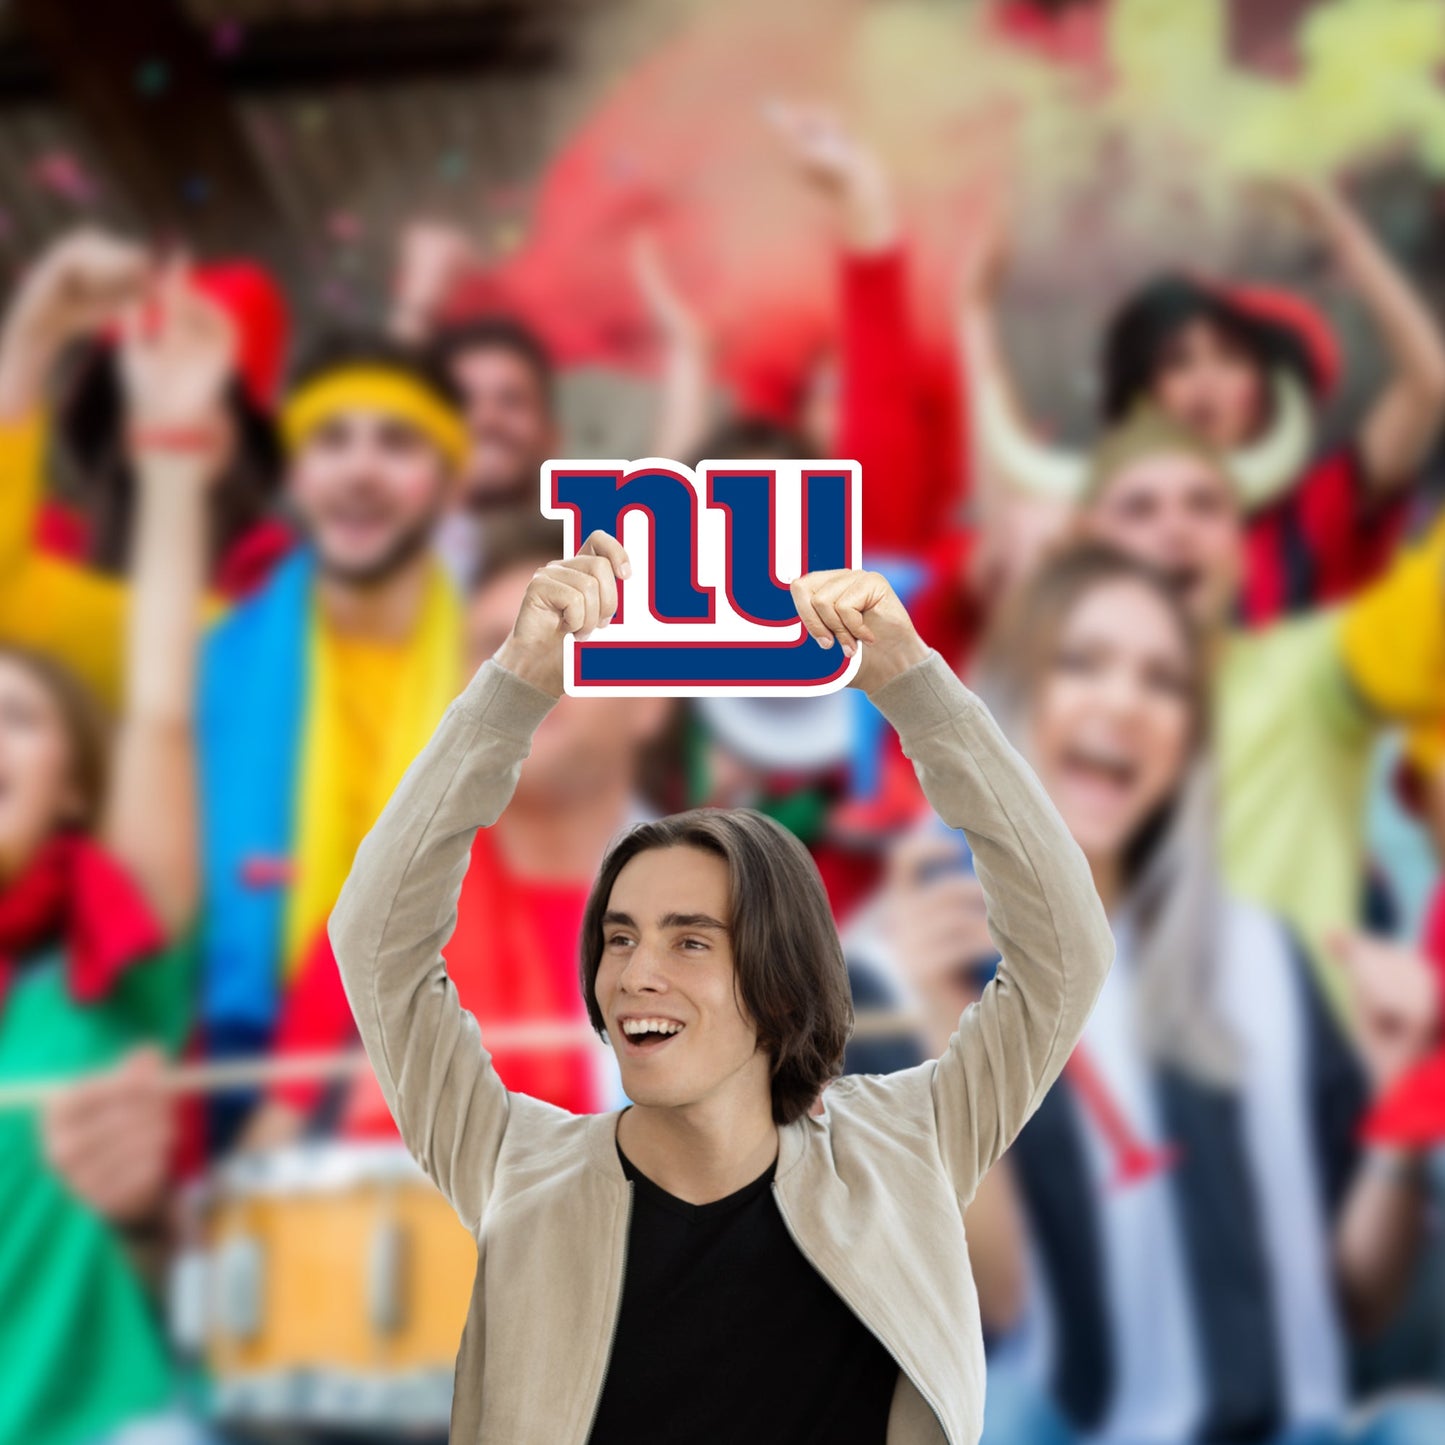 New York Giants: Logo Foam Core Cutout - Officially Licensed NFL Big Head